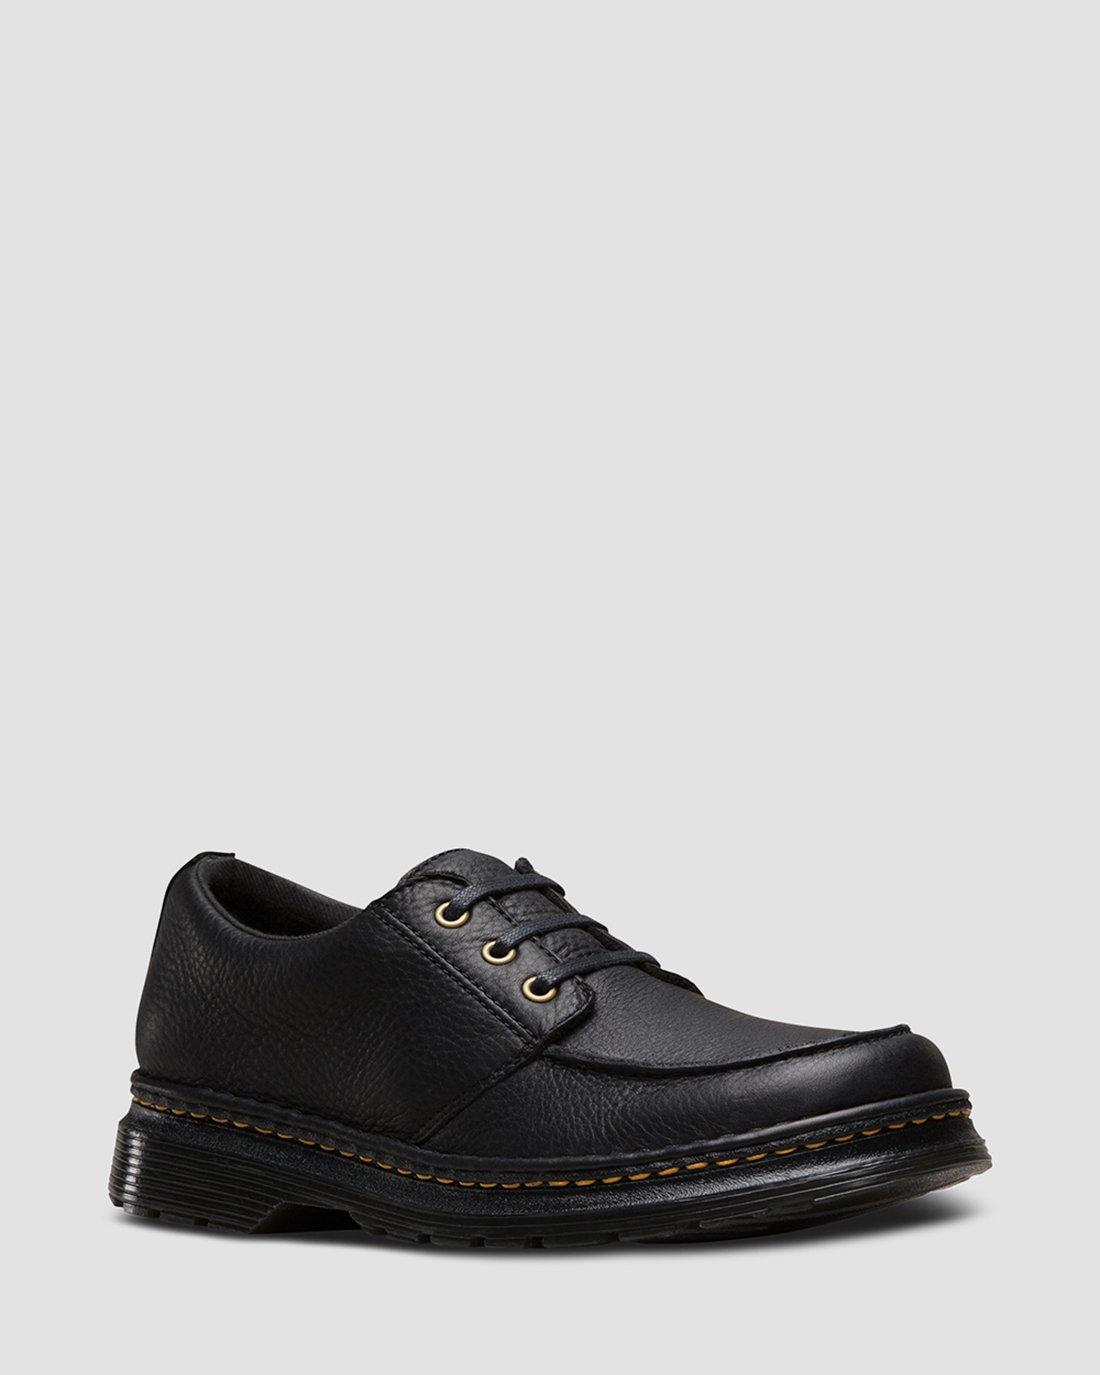 Lubbock Grizzly in Black | Dr. Martens